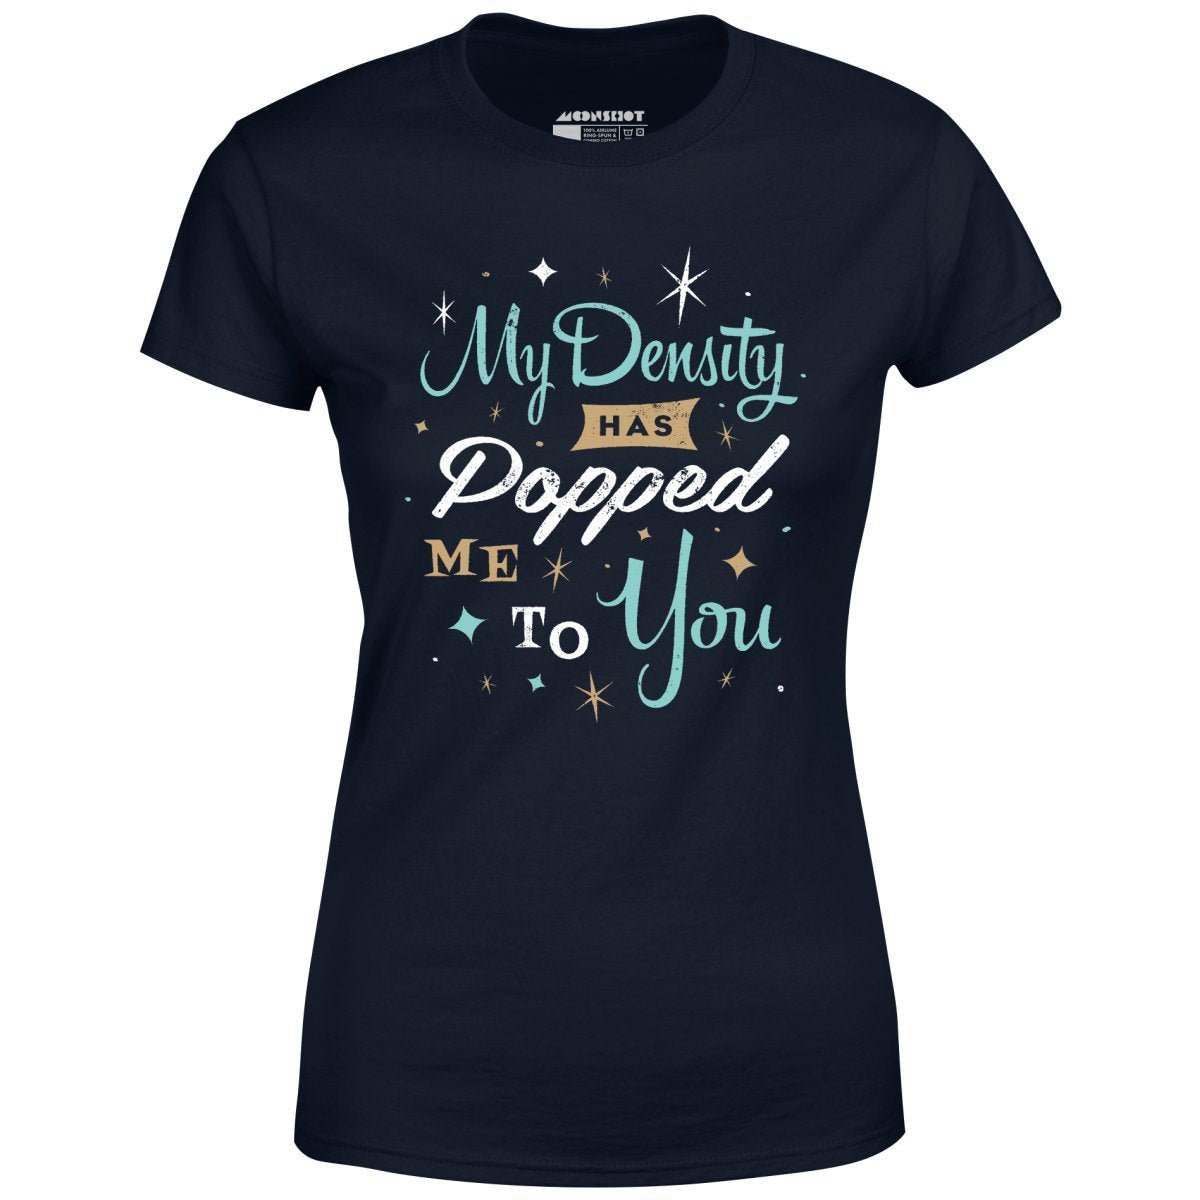 My Density Has Popped Me To You - Women's T-Shirt